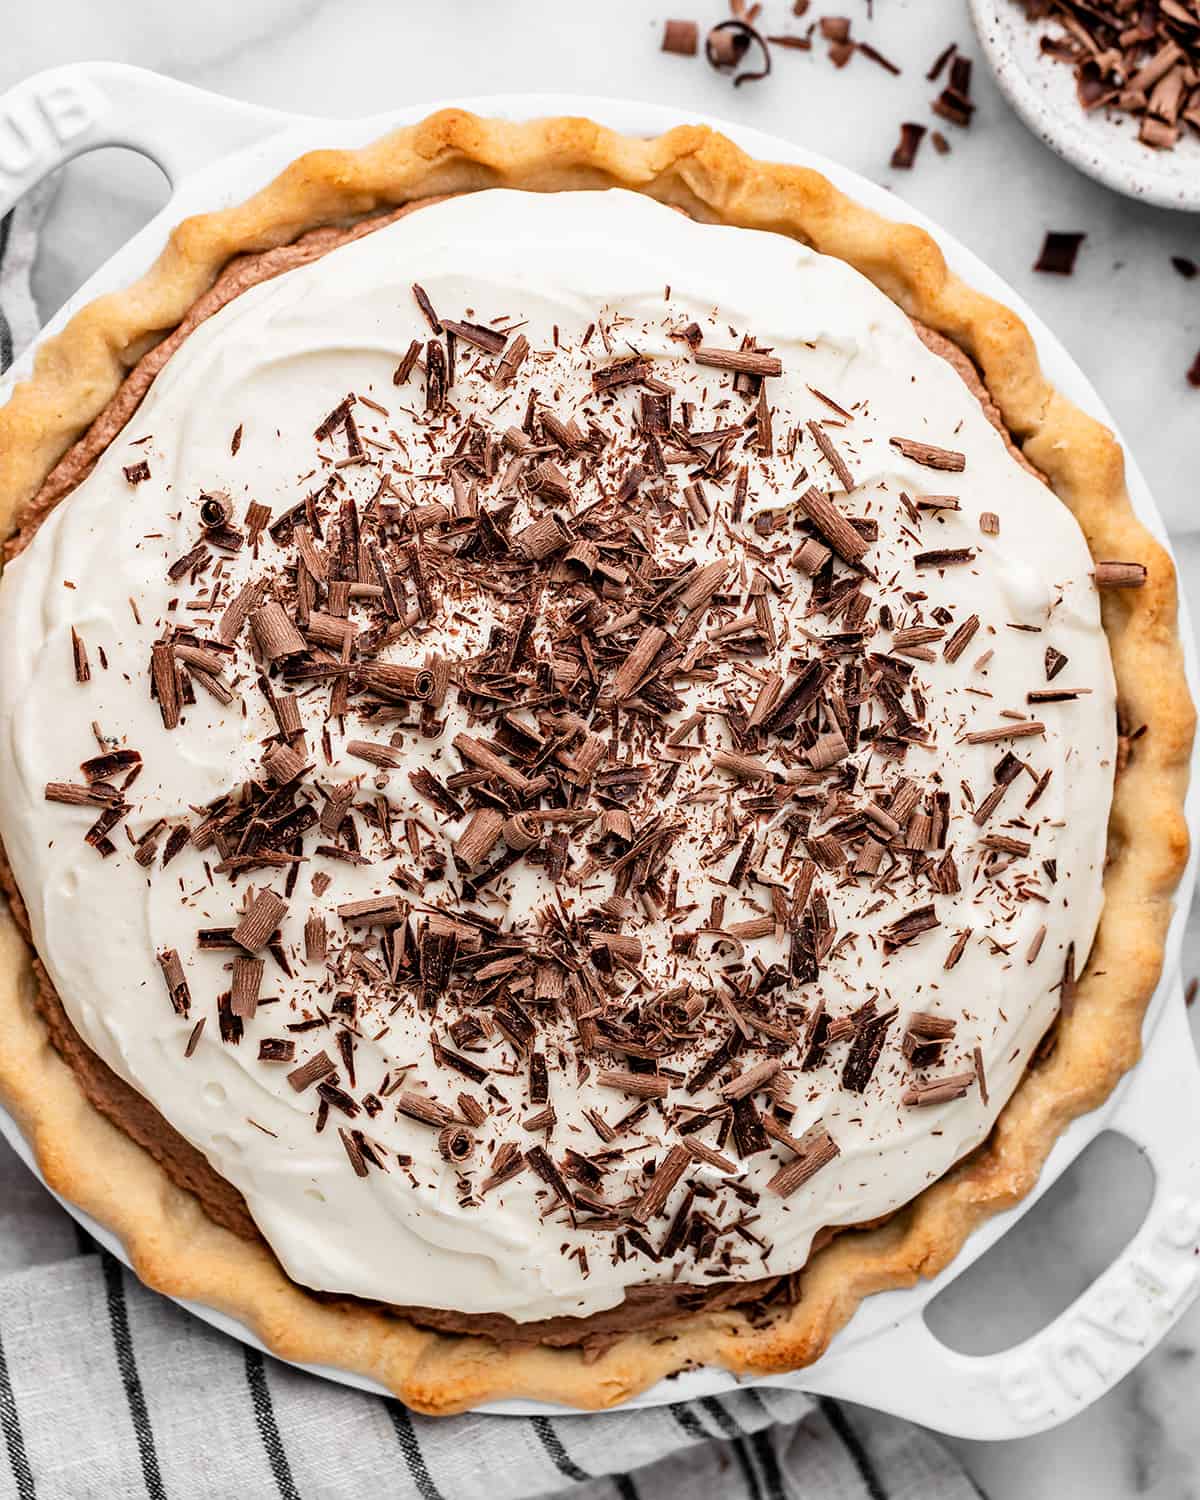 French Silk Pie Recipe in a pie dish topped with chocolate shavings